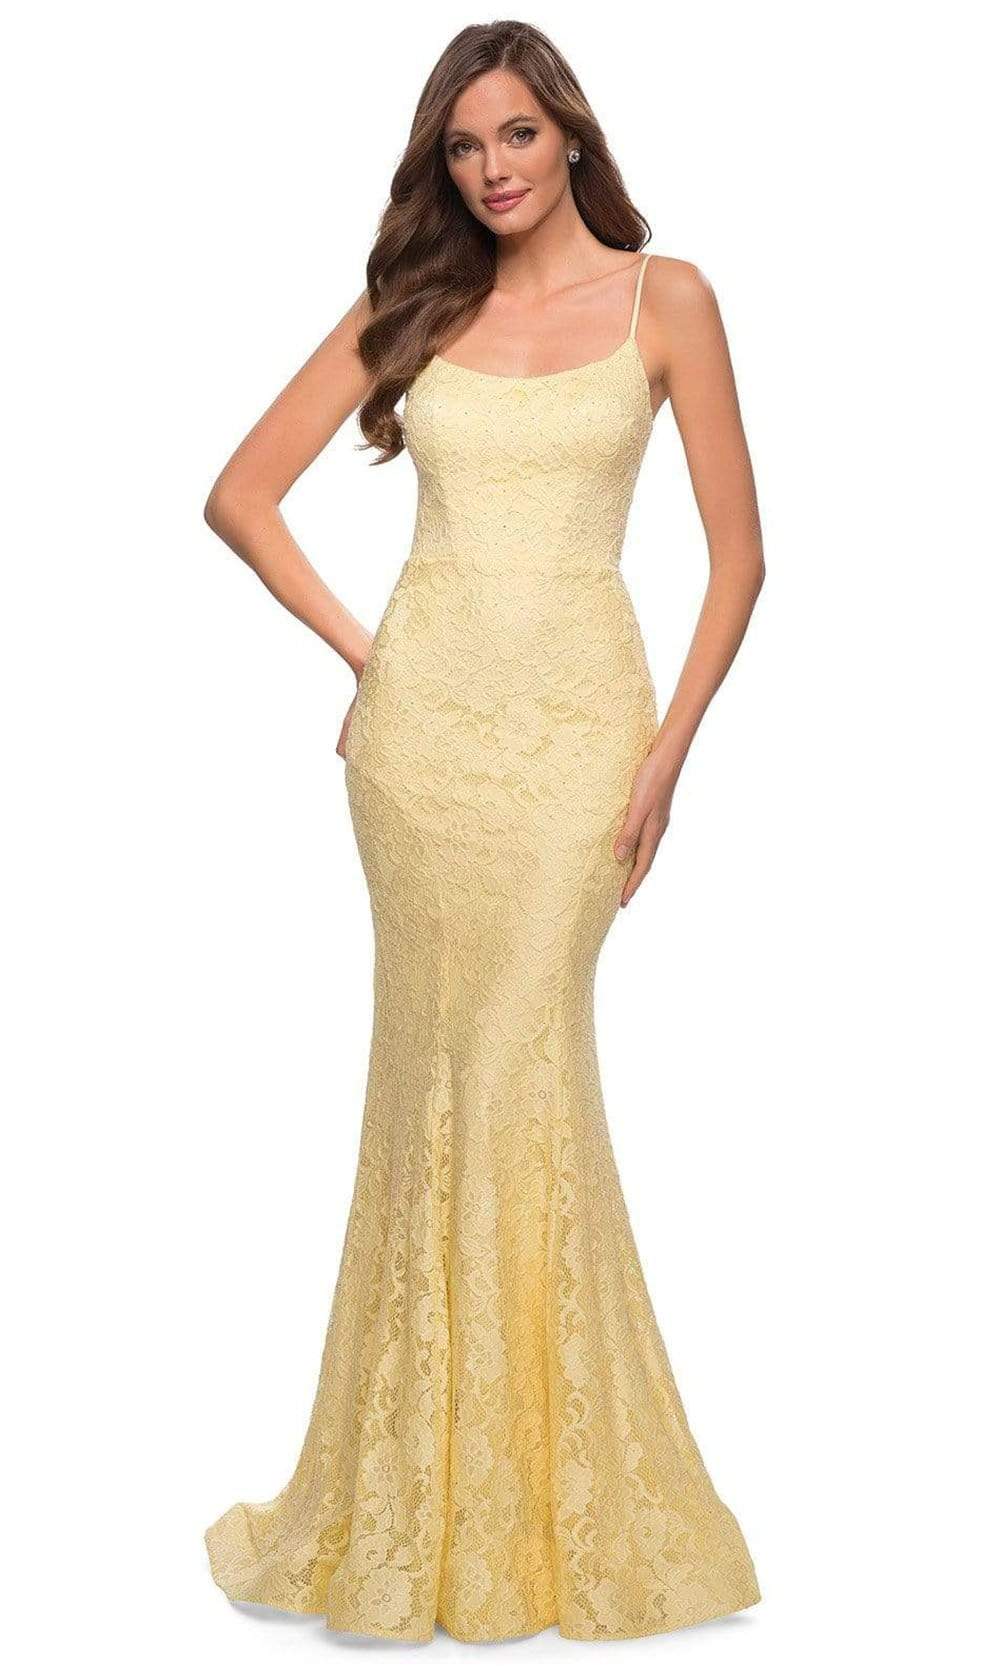 Image of La Femme - 29611 Spaghetti Strap Lace Modest Prom Gown